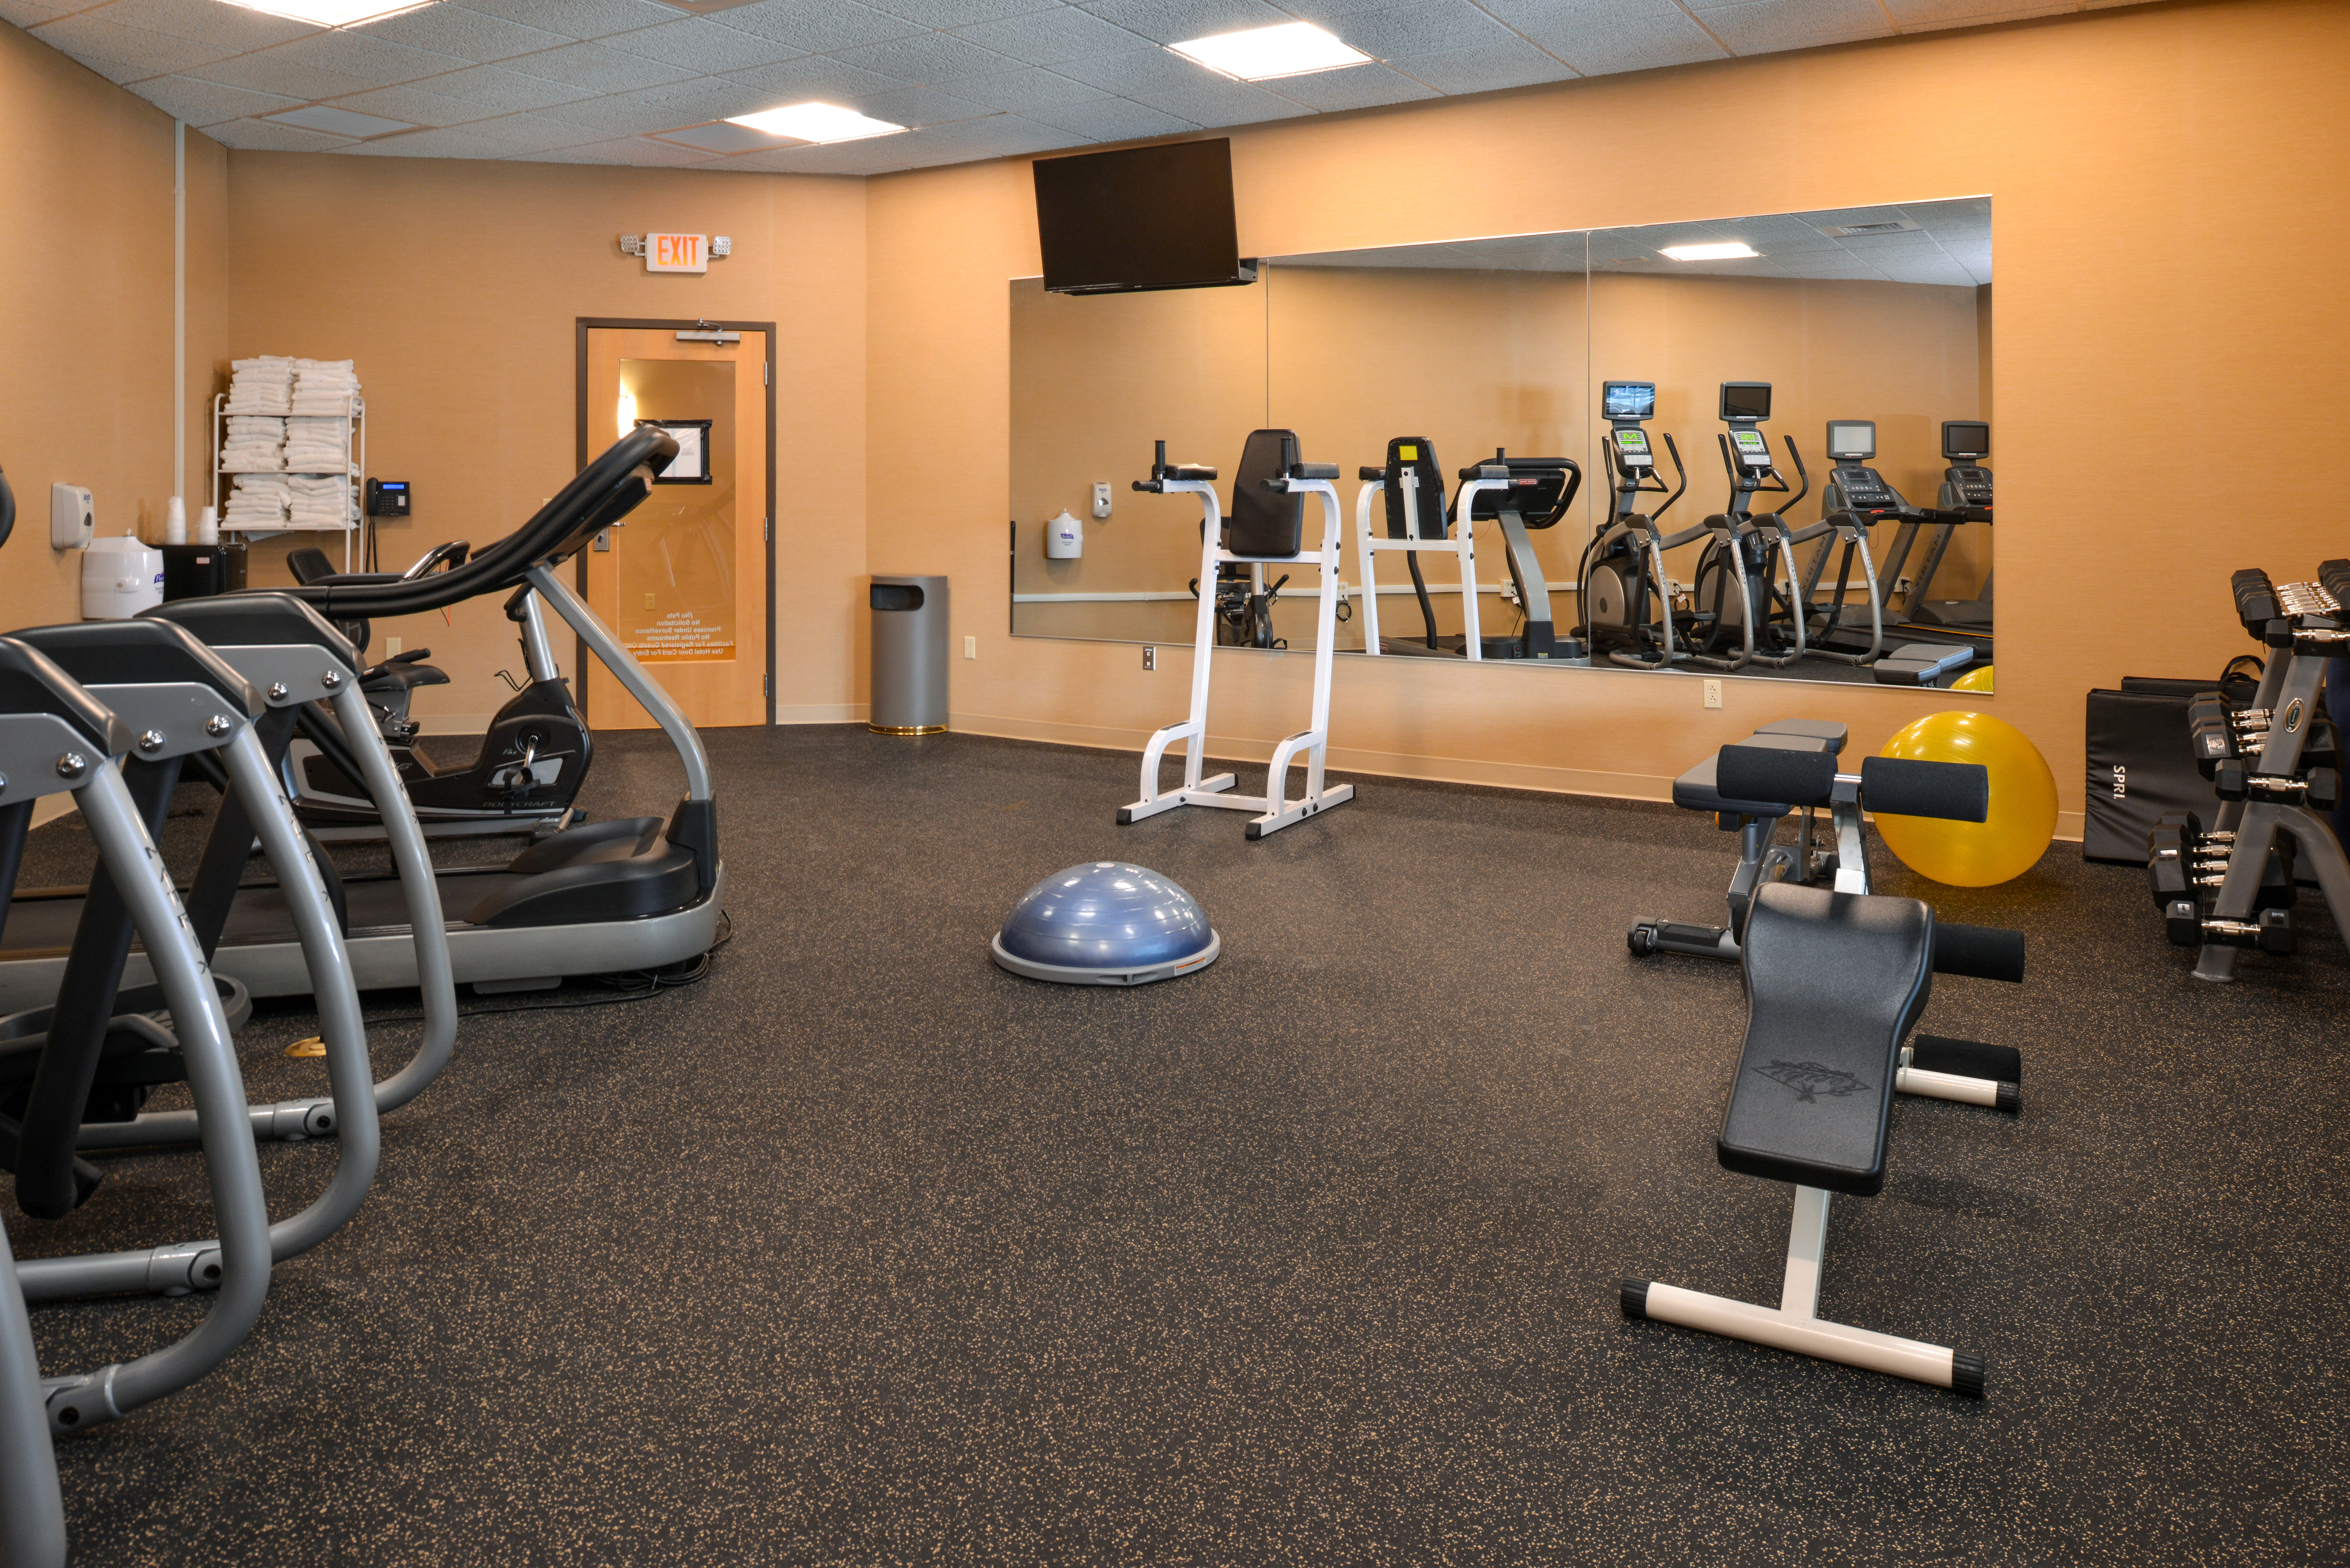 Fitness Room, Exercise, Stay Healthy 